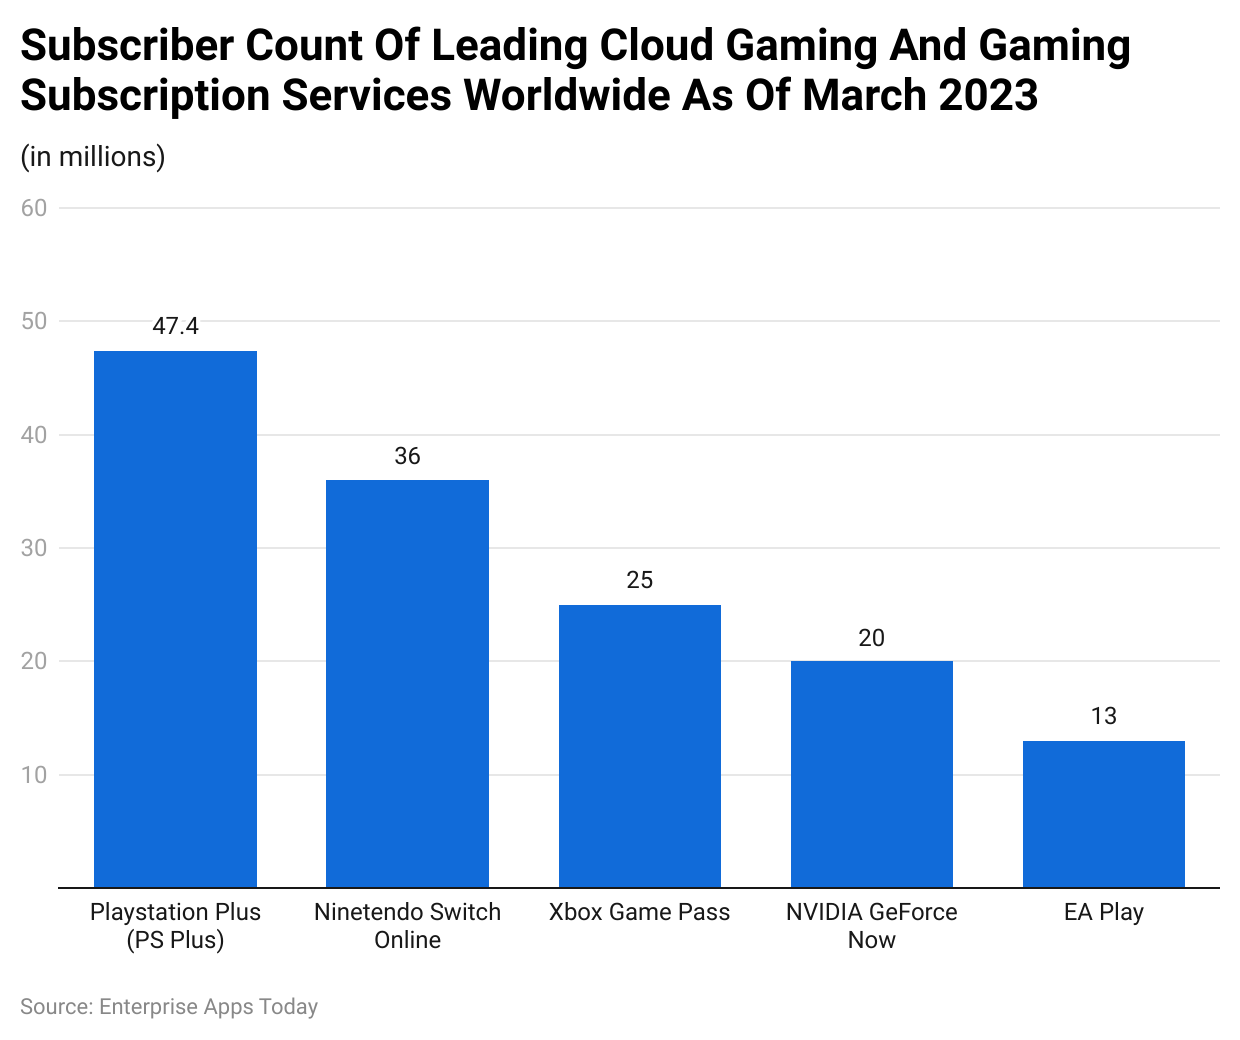 Subscriber count of leading cloud gaming and gaming subscription services worldwide as of March 2023